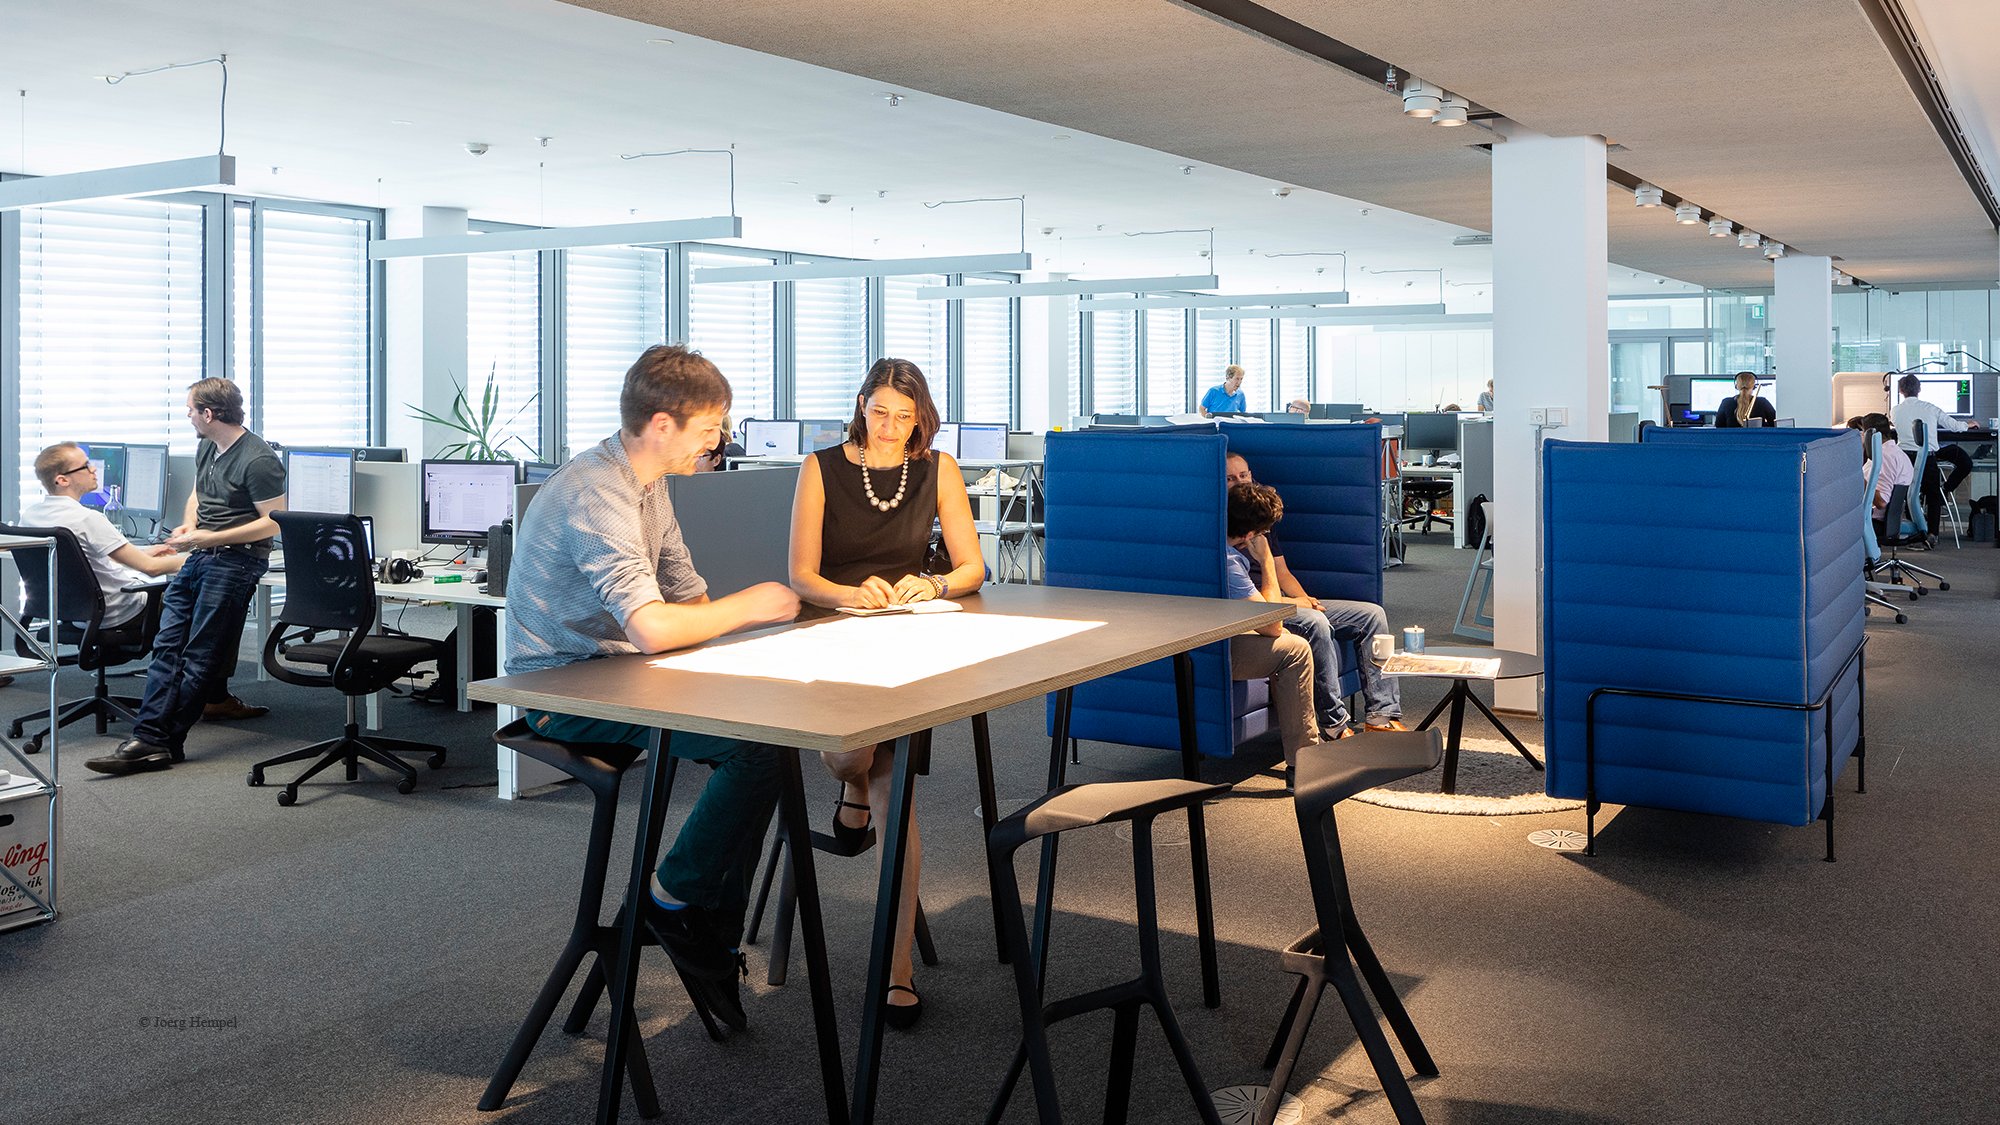 The employees of the Berlin office move flexibly between work areas and can choose the most suitable space.